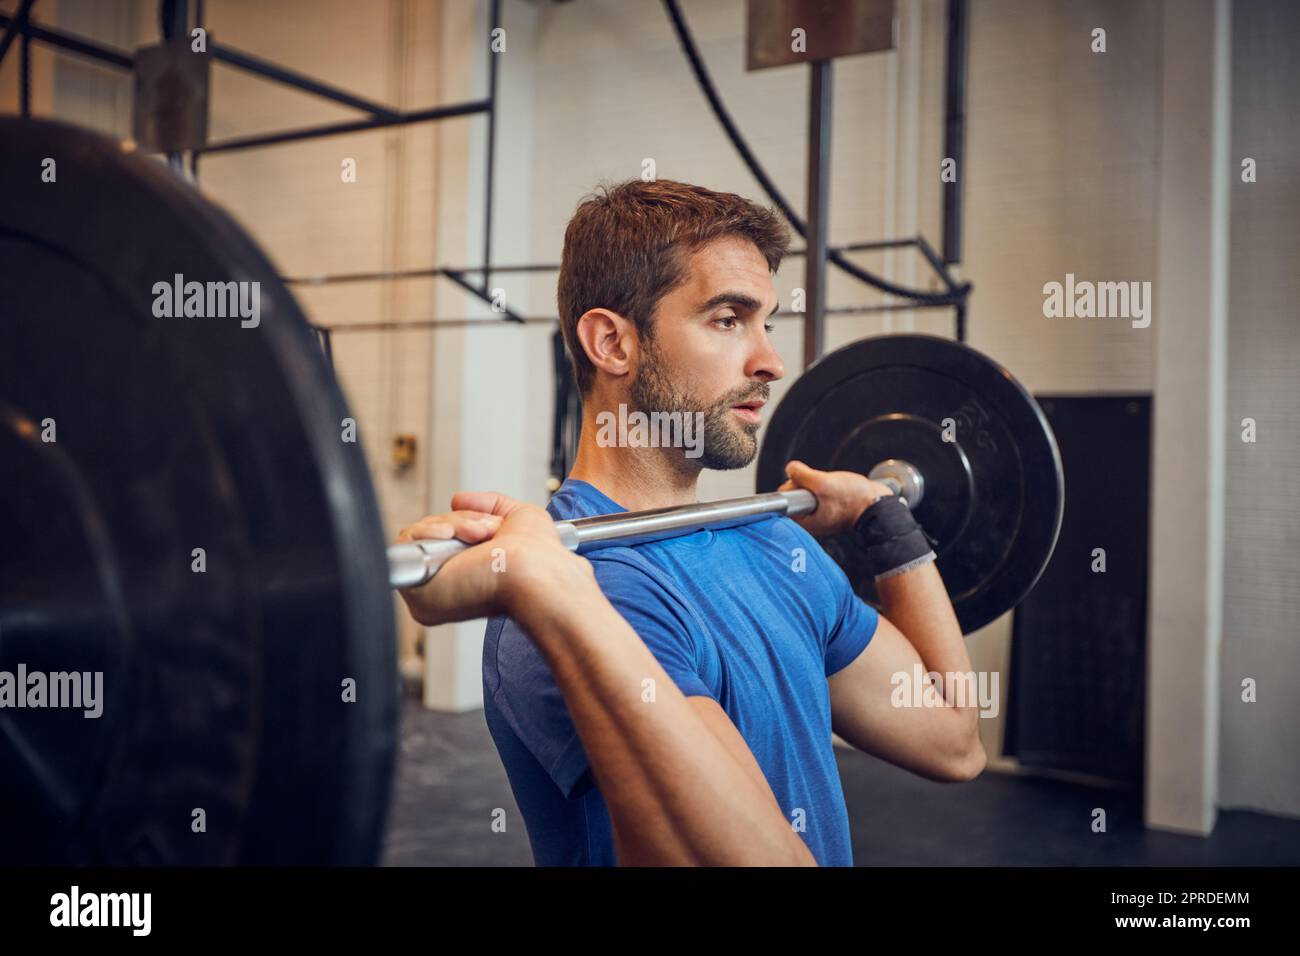 No quit, I want to lift. a handsome young man lifting weights while working out in the gym. Stock Photo